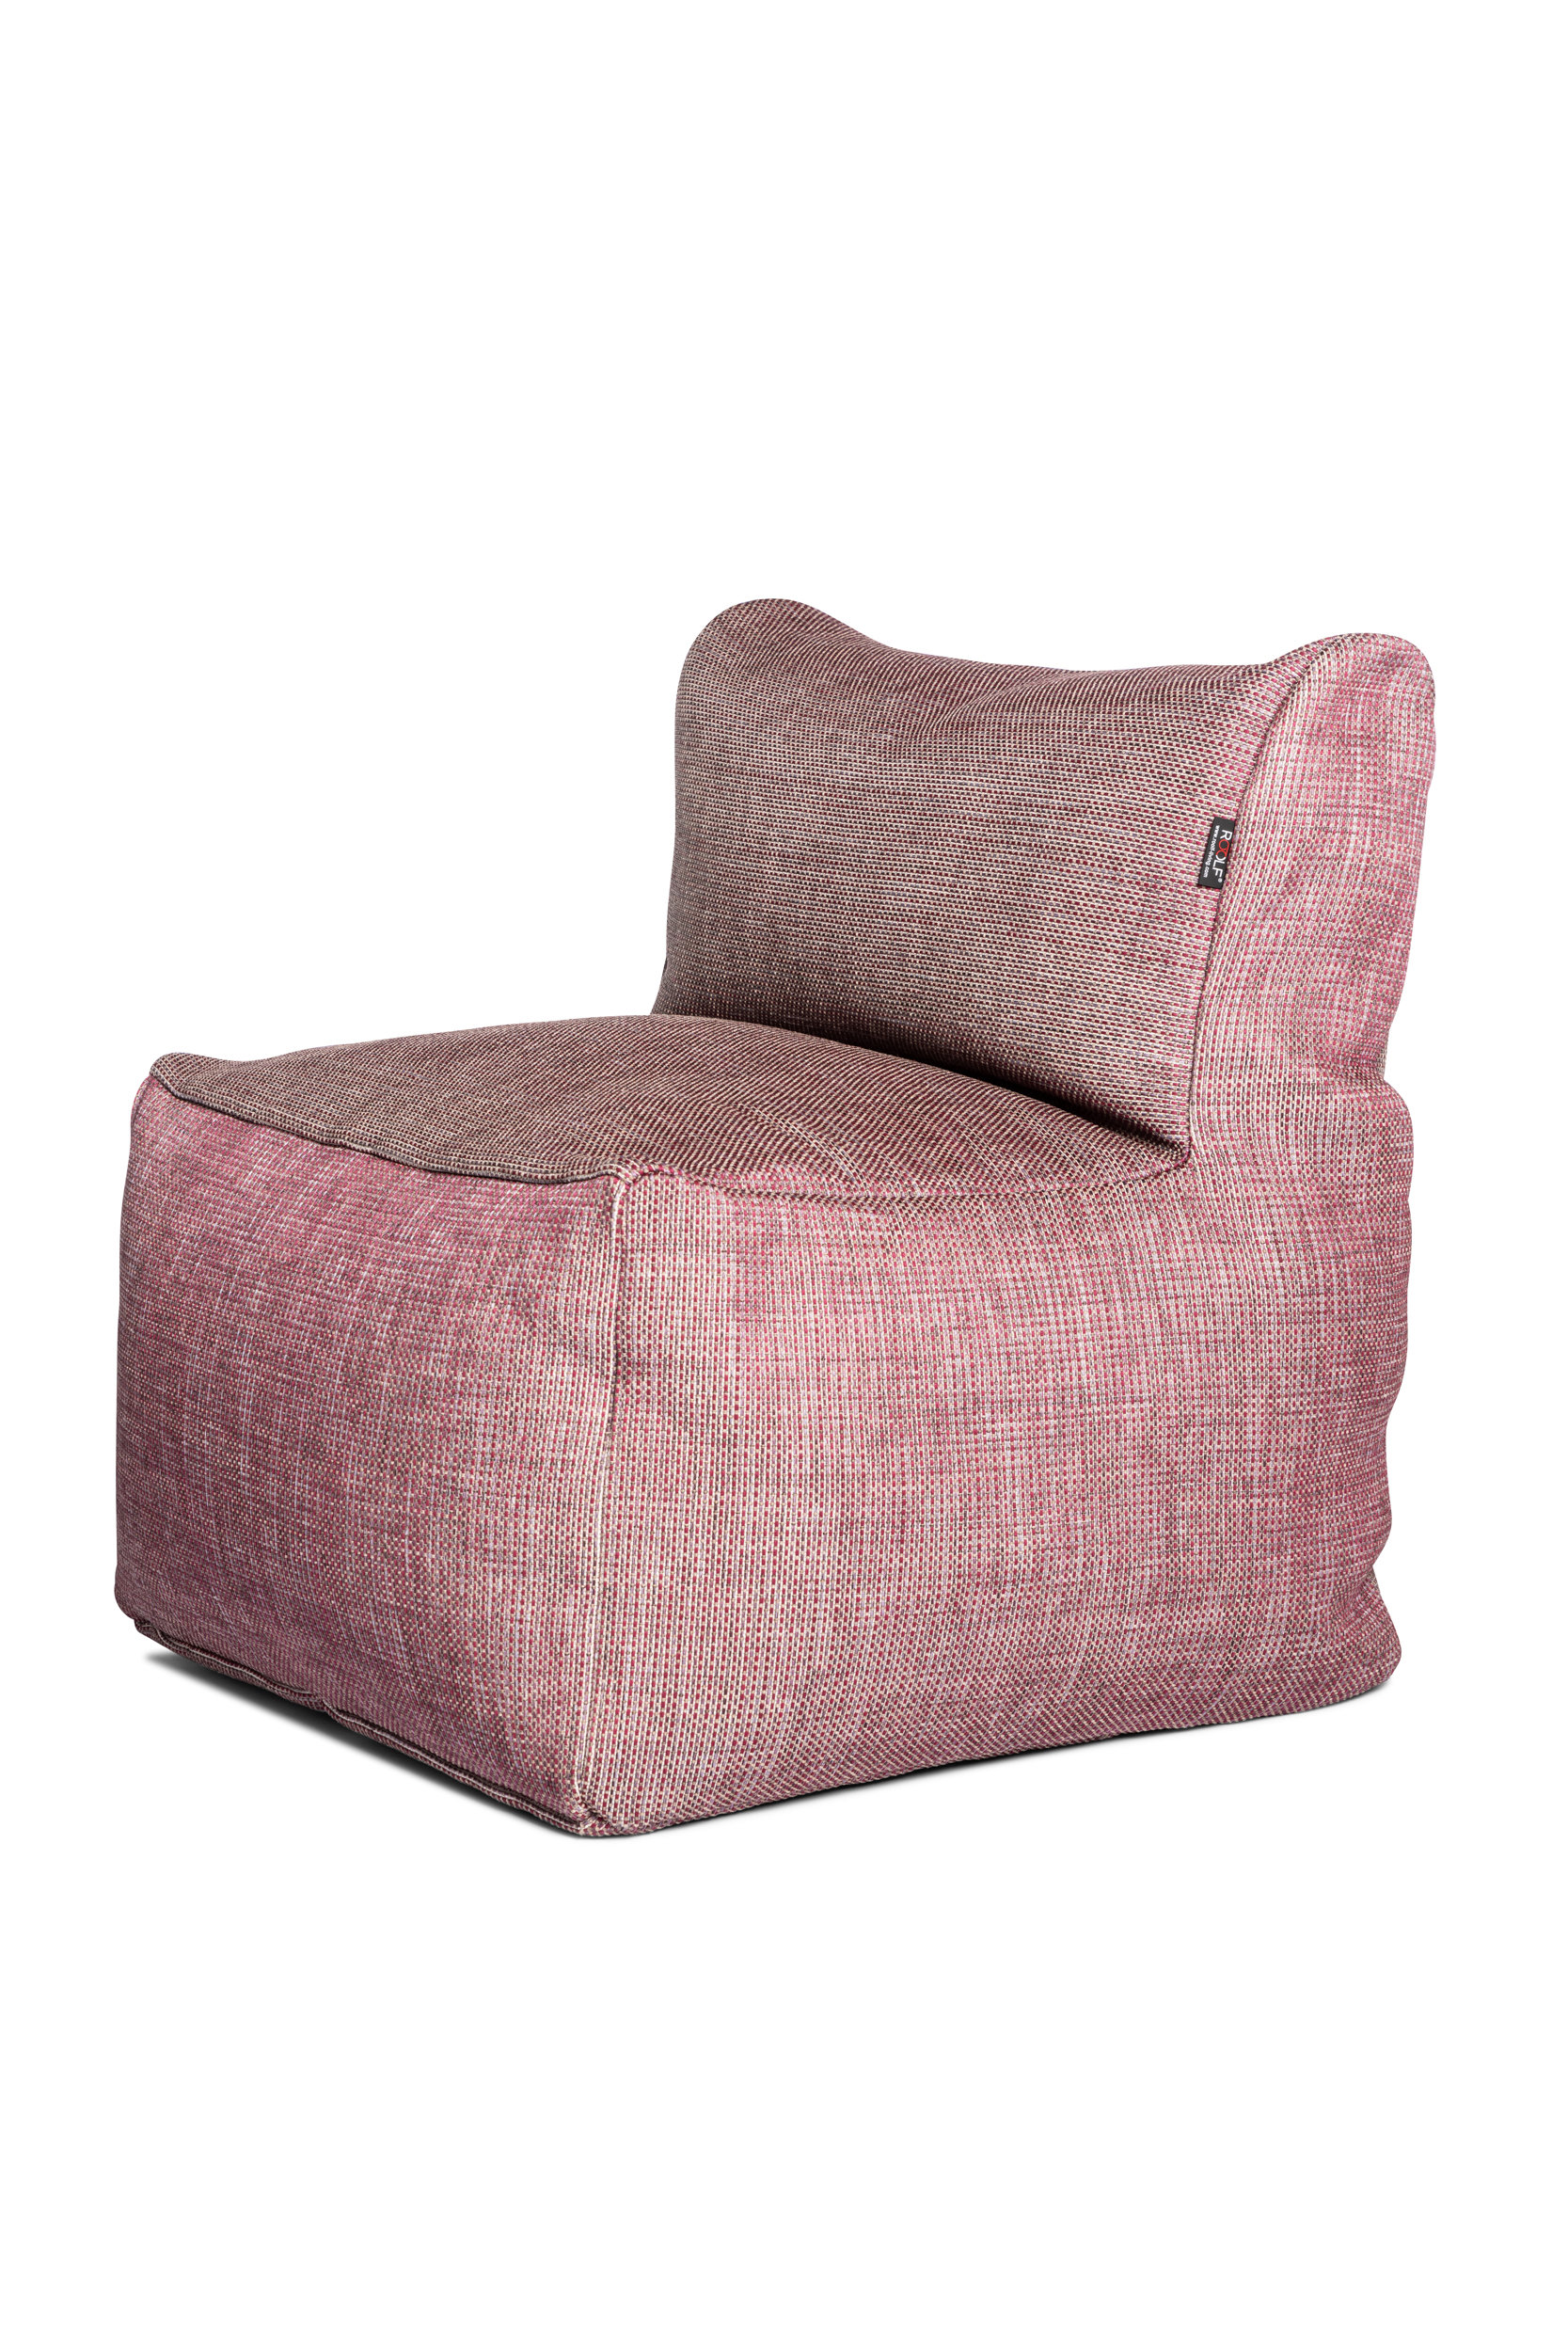 Roolf Outdoor Living Dotty Pouf Extra Large Raspberry Side